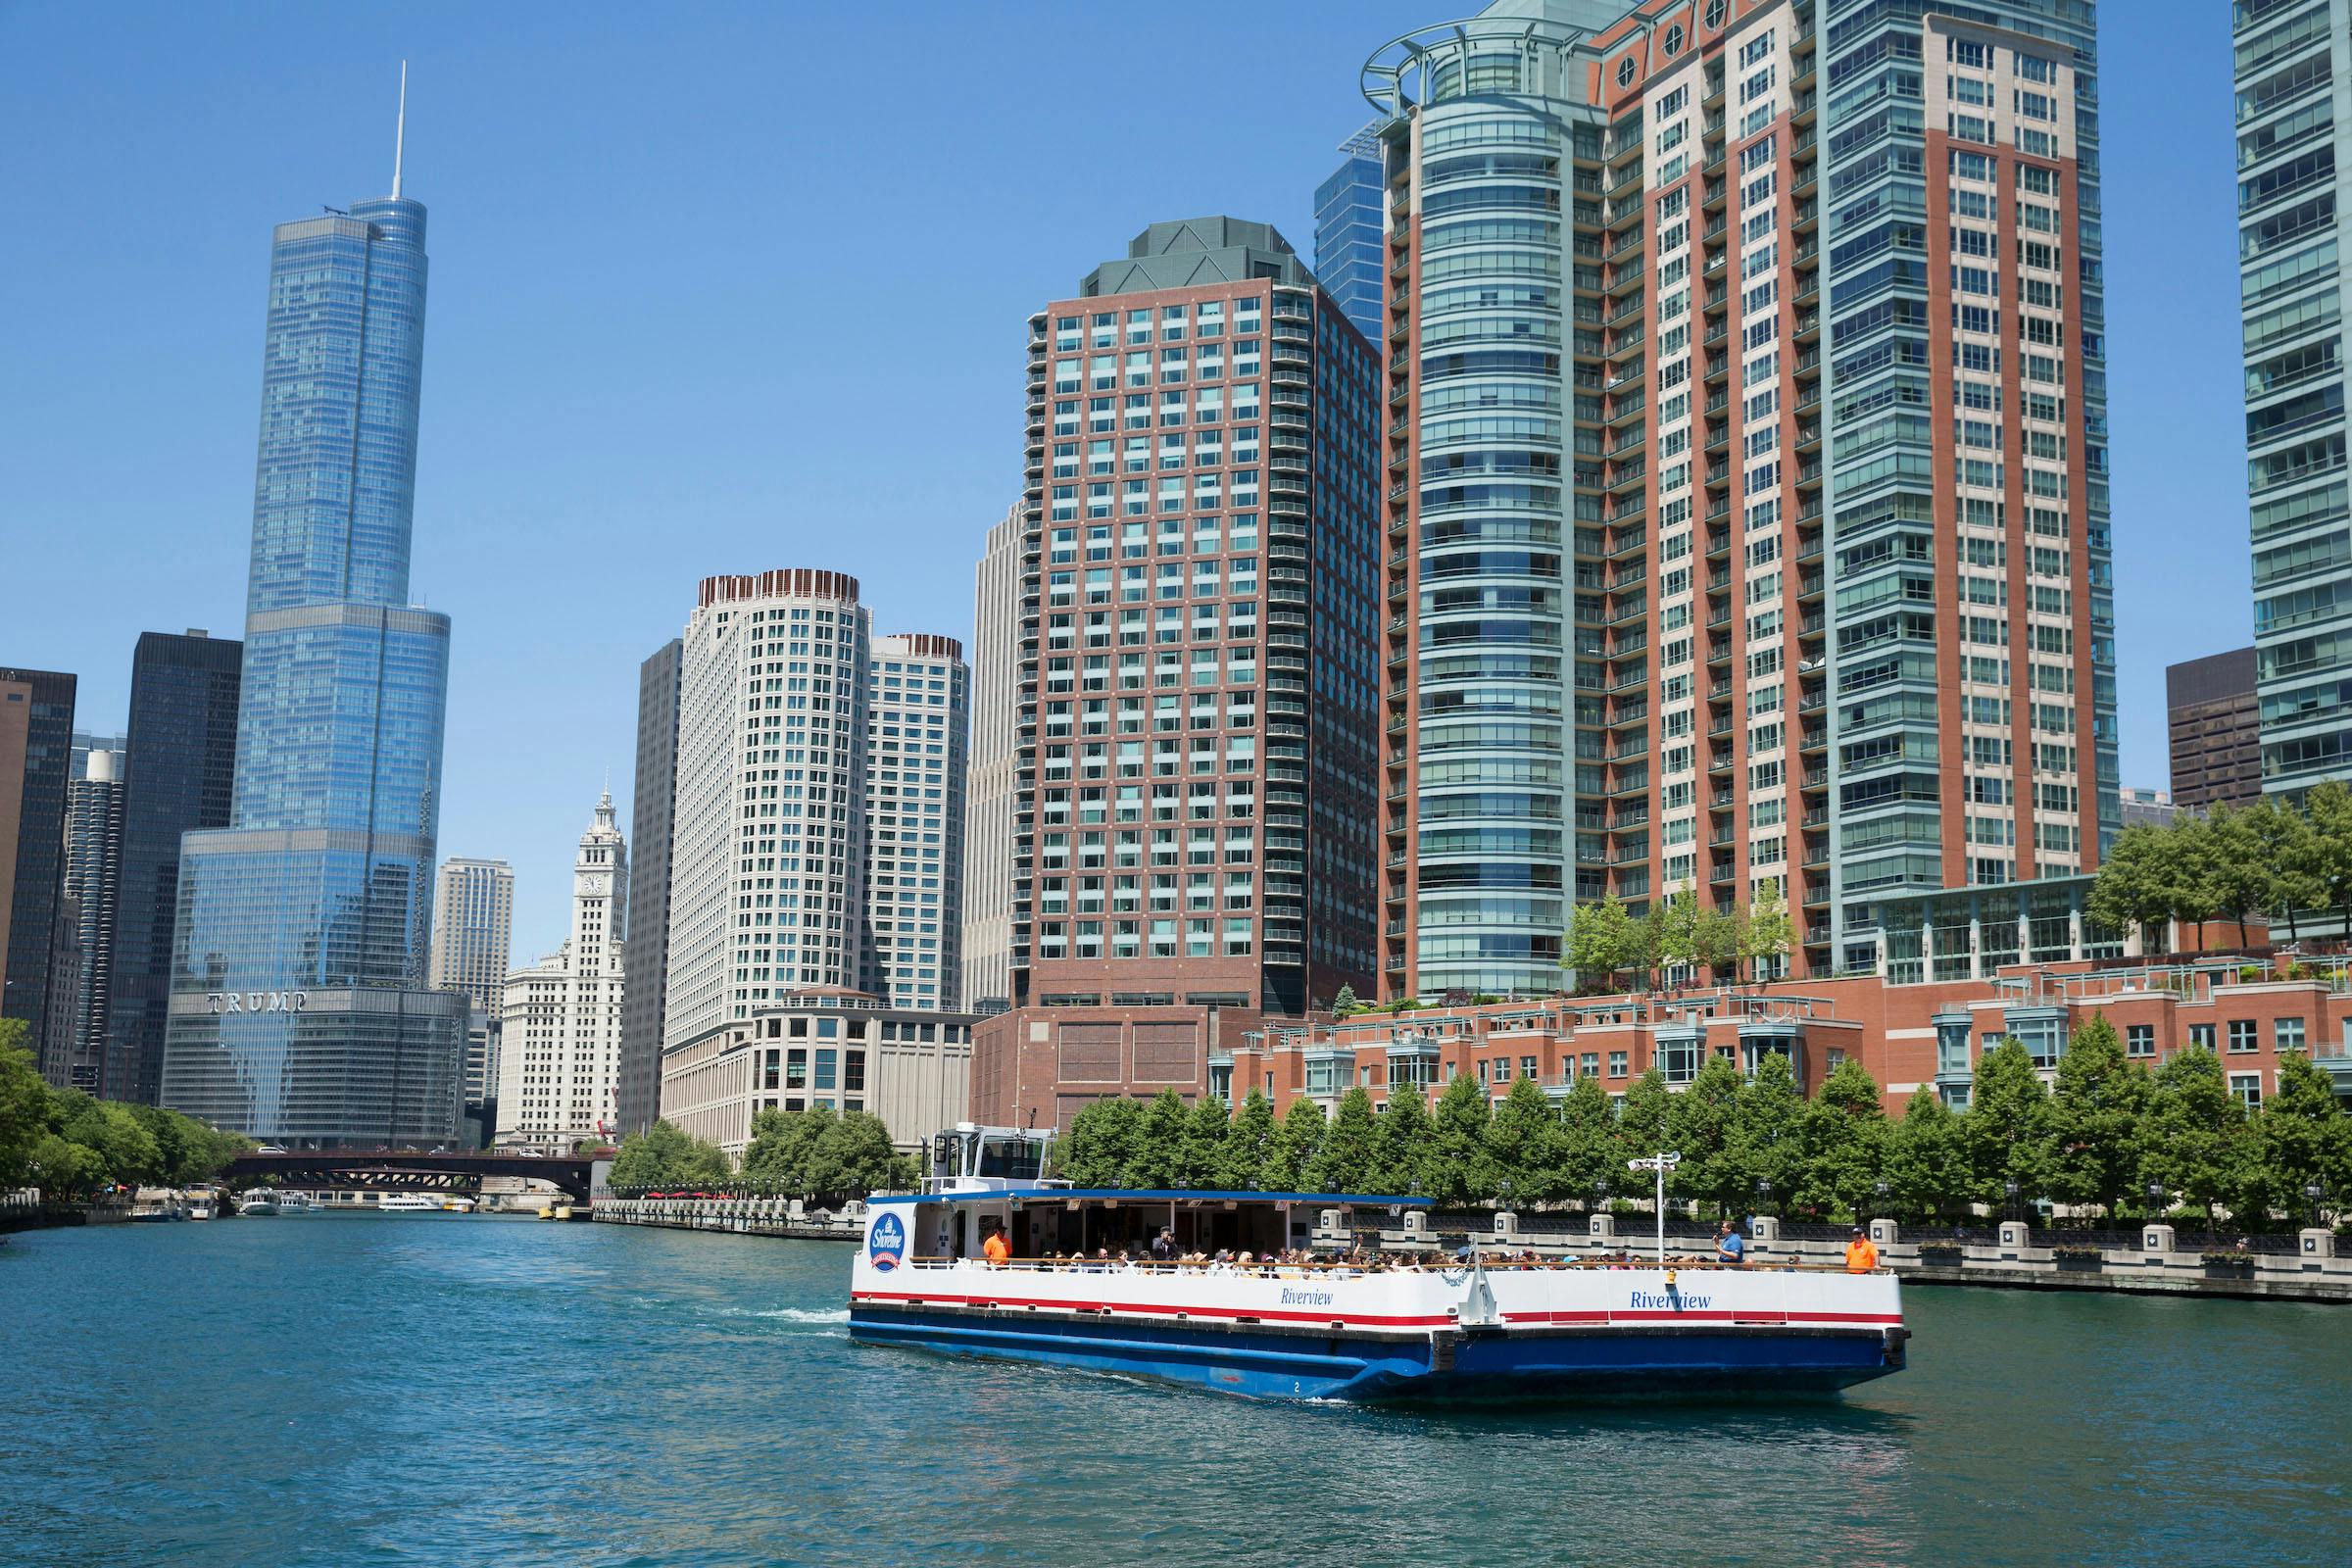 Architecture cruise on the Chicago River from Navy Pier Musement